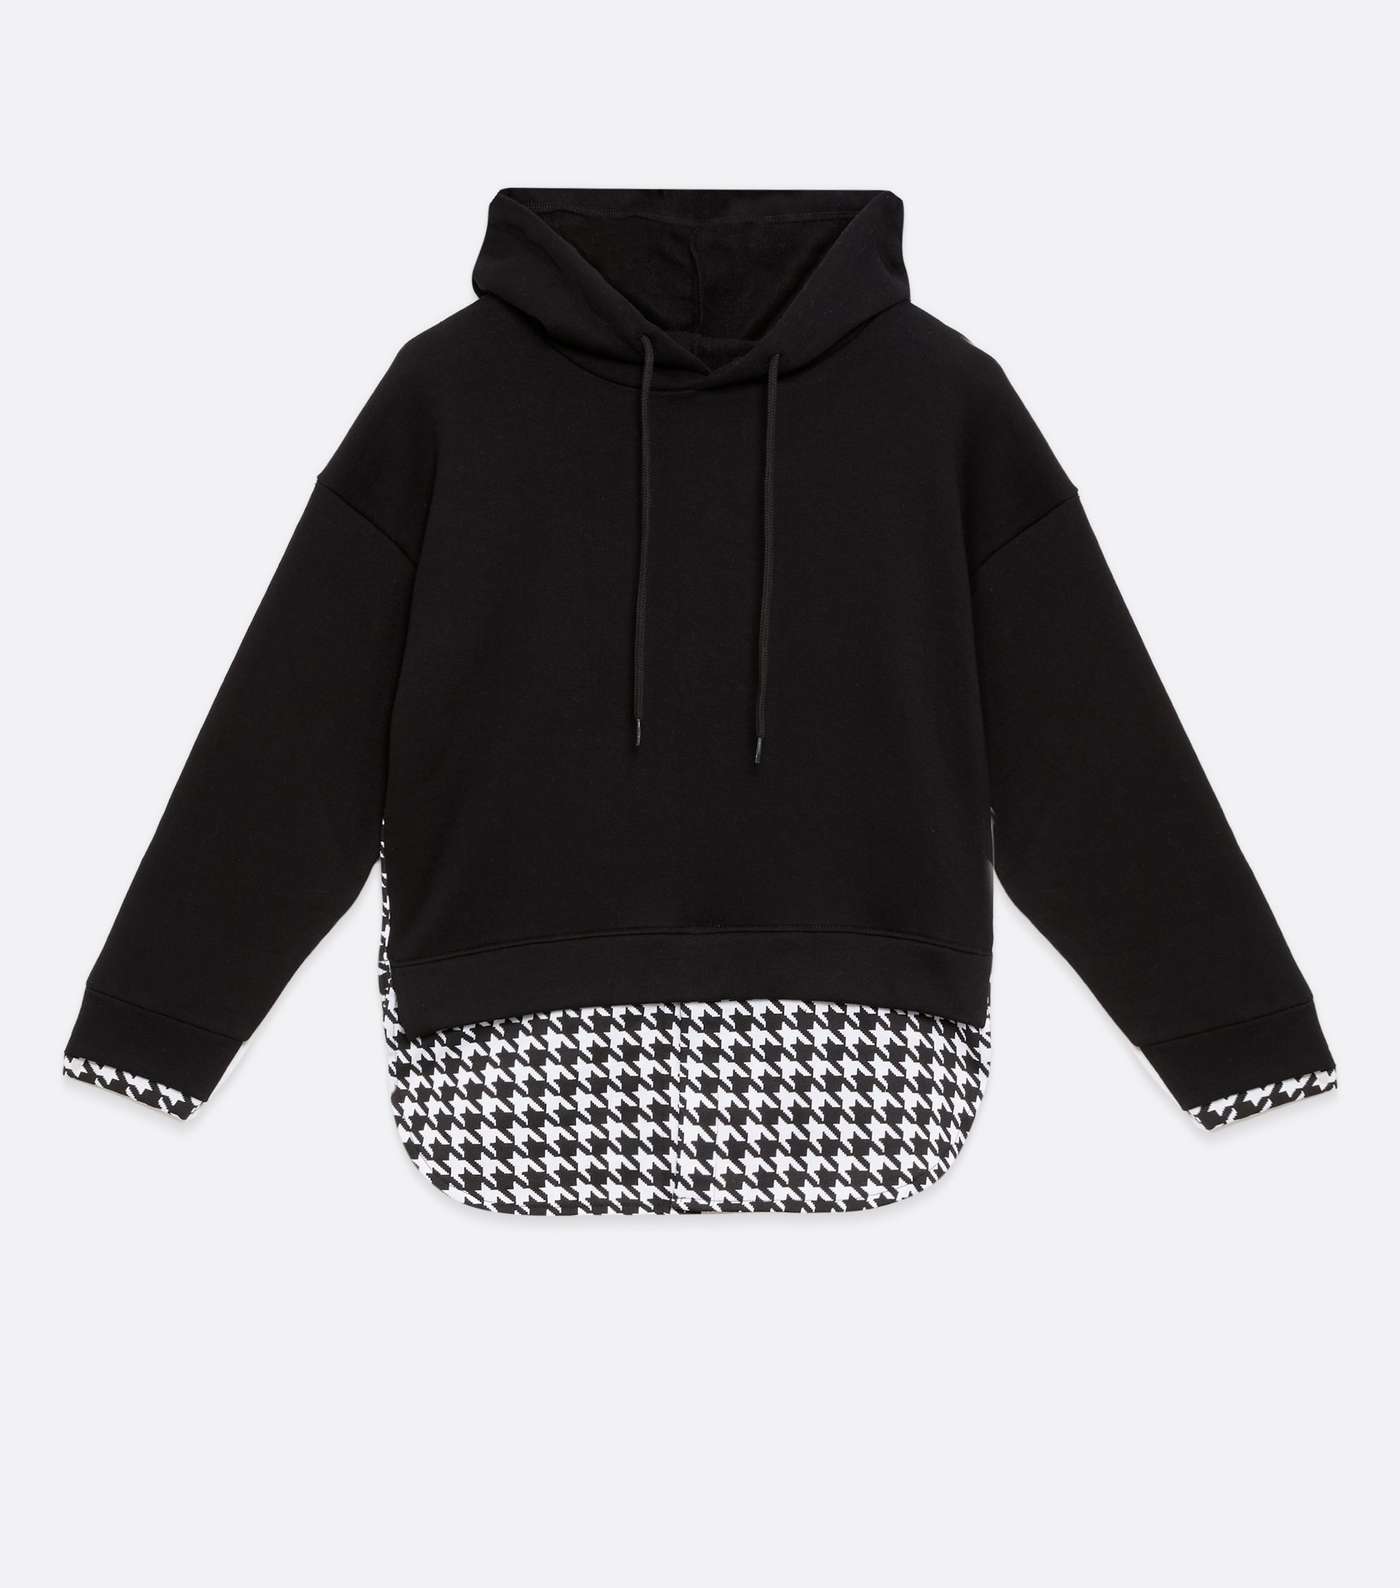 Cameo Rose Black Dogtooth 2 in 1 Hoodie Image 5